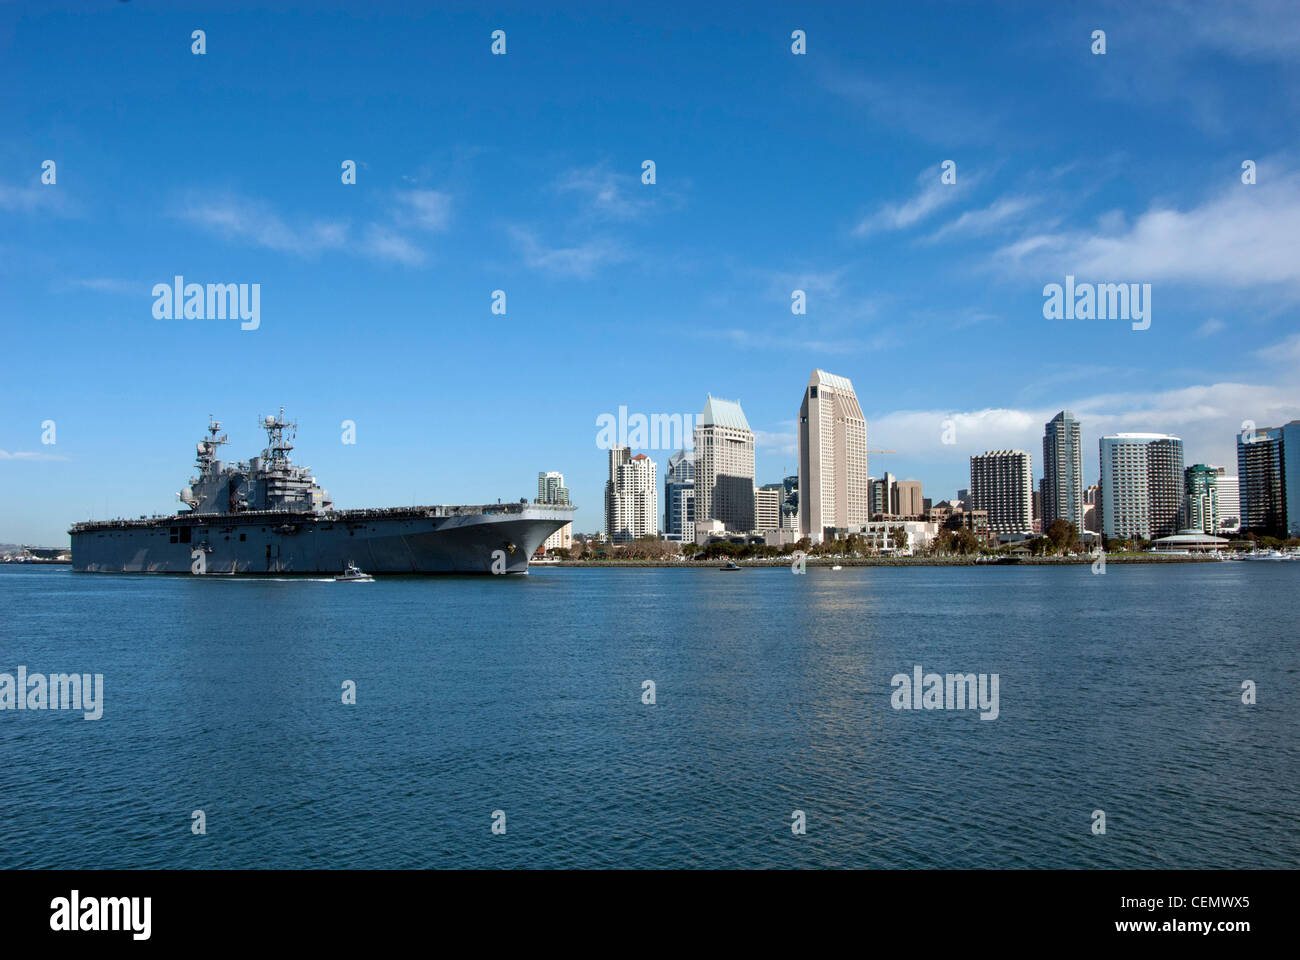 The amphibious assault ship USS Peleliu (LHD 5) transits through the San Diego Bay. Peleliu is returning from a scheduled underway in preparation for its upcoming 2012 deployment. Stock Photo